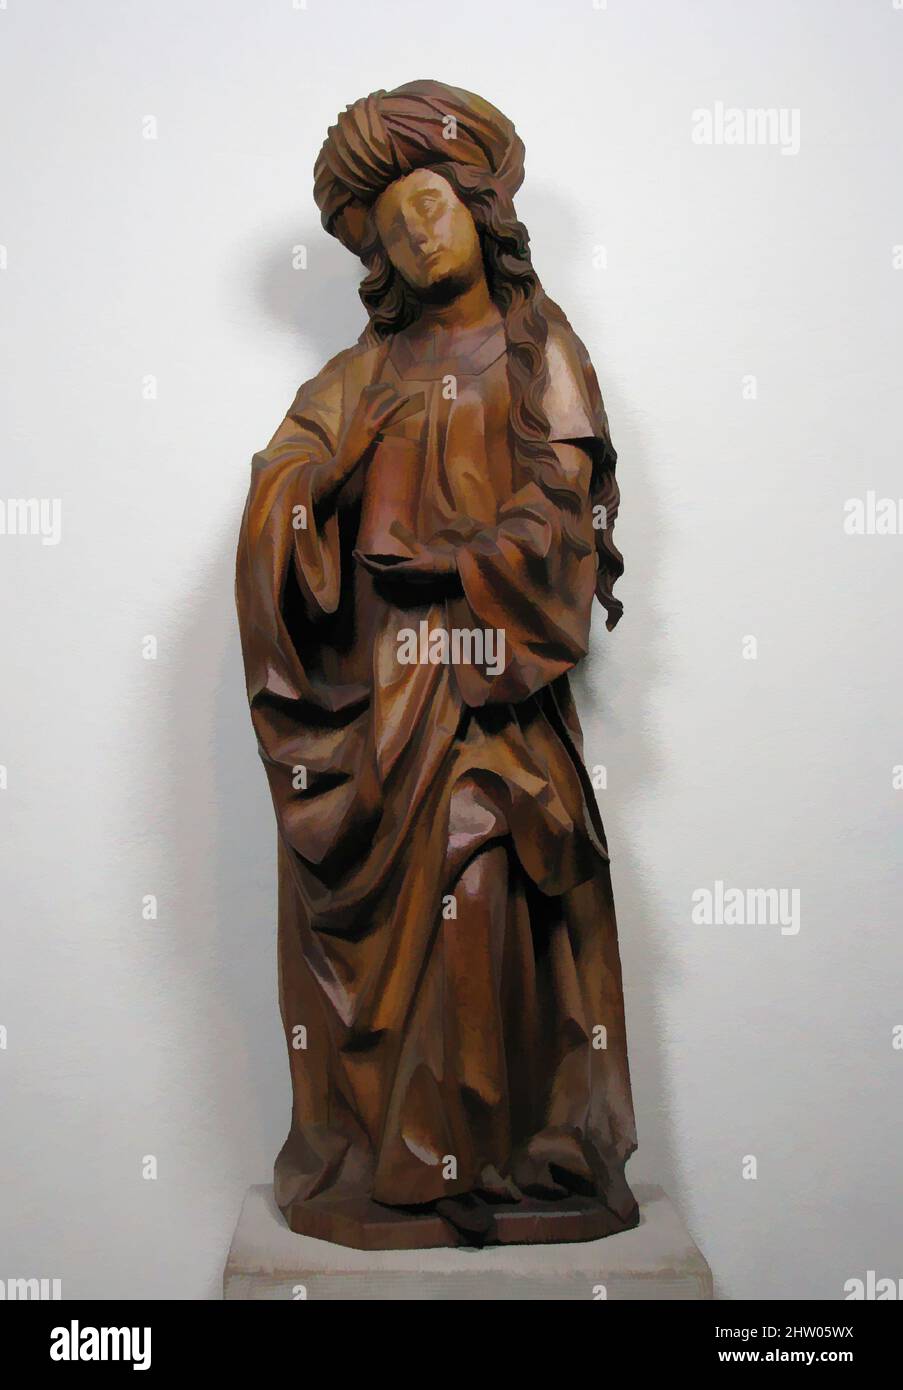 Art inspired by Saint Mary Magdalene, late 15th century, Made in probably Swabia, Germany, German, Limewood, Overall: 48 1/2 x 17 x 11 5/8 in. (123.2 x 43.2 x 29.5 cm), Sculpture-Wood, The calm, remote face and the broad sweep of drapery produce a serene nobility characteristic of, Classic works modernized by Artotop with a splash of modernity. Shapes, color and value, eye-catching visual impact on art. Emotions through freedom of artworks in a contemporary way. A timeless message pursuing a wildly creative new direction. Artists turning to the digital medium and creating the Artotop NFT Stock Photo